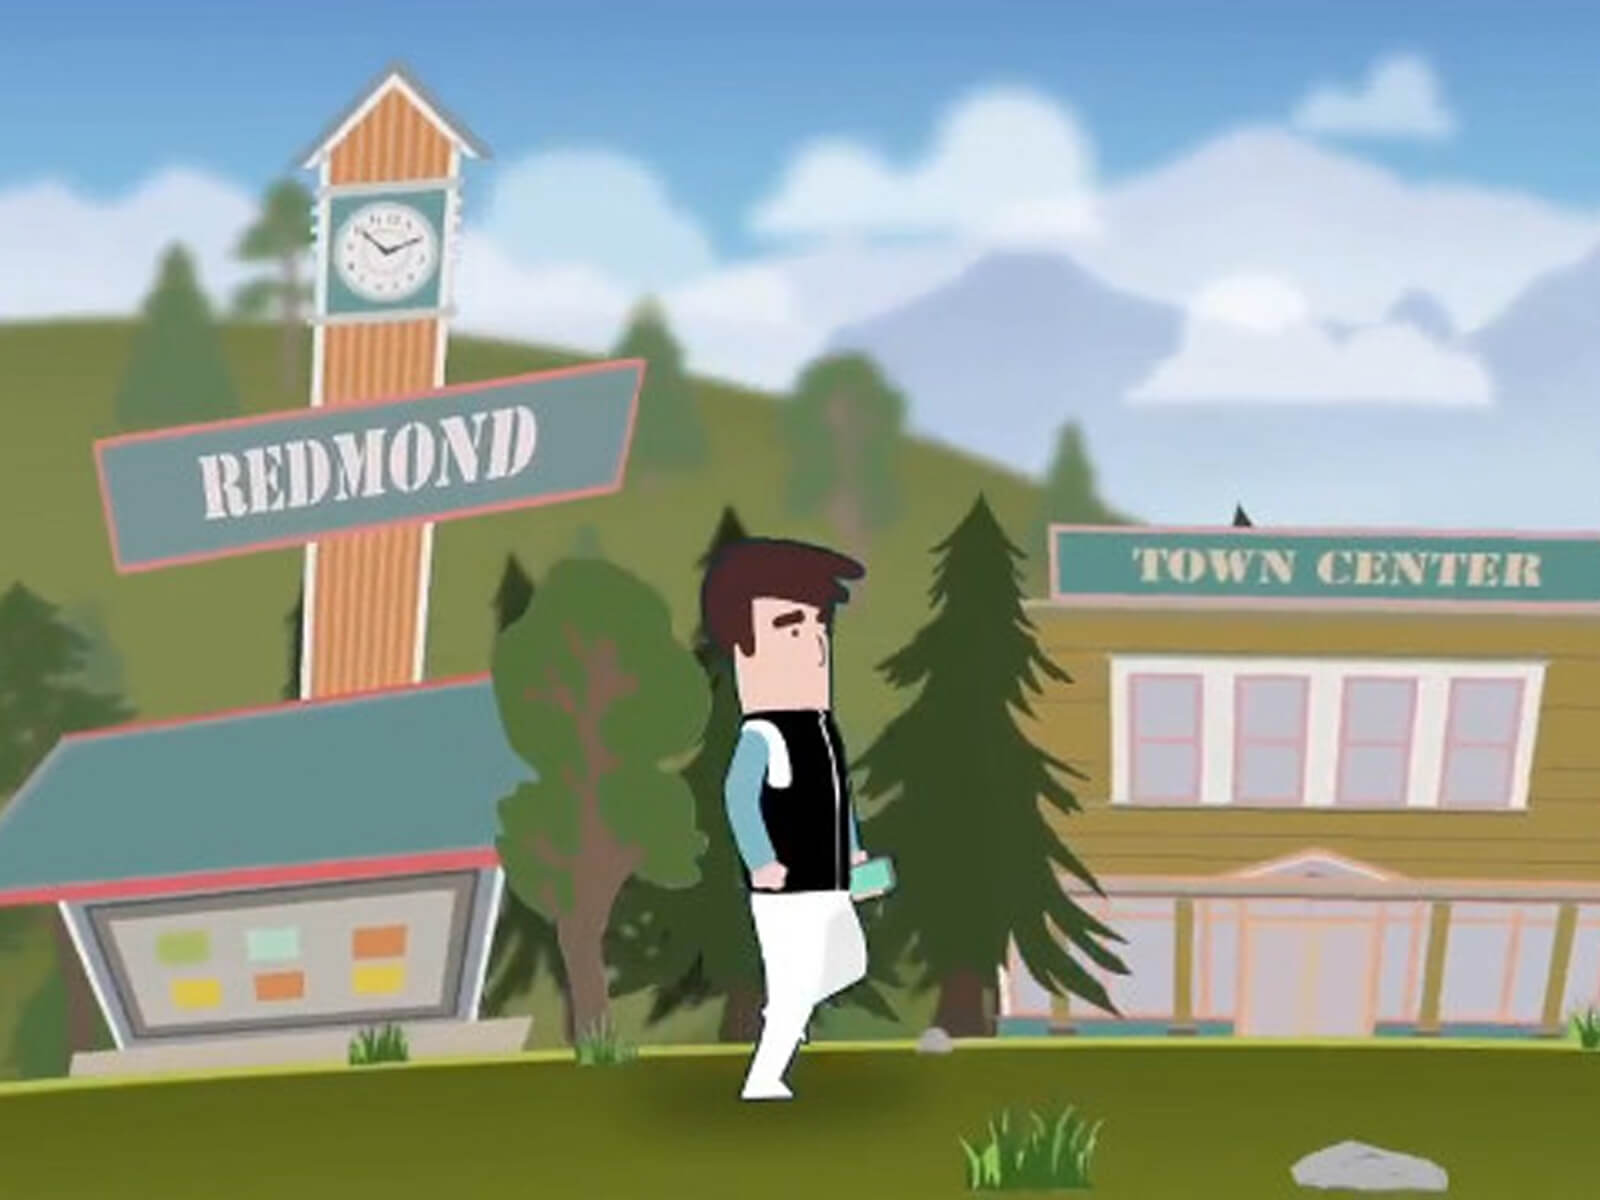 Still frame of 2D animation showing representations of the city of Redmond against a forested and mountainous background